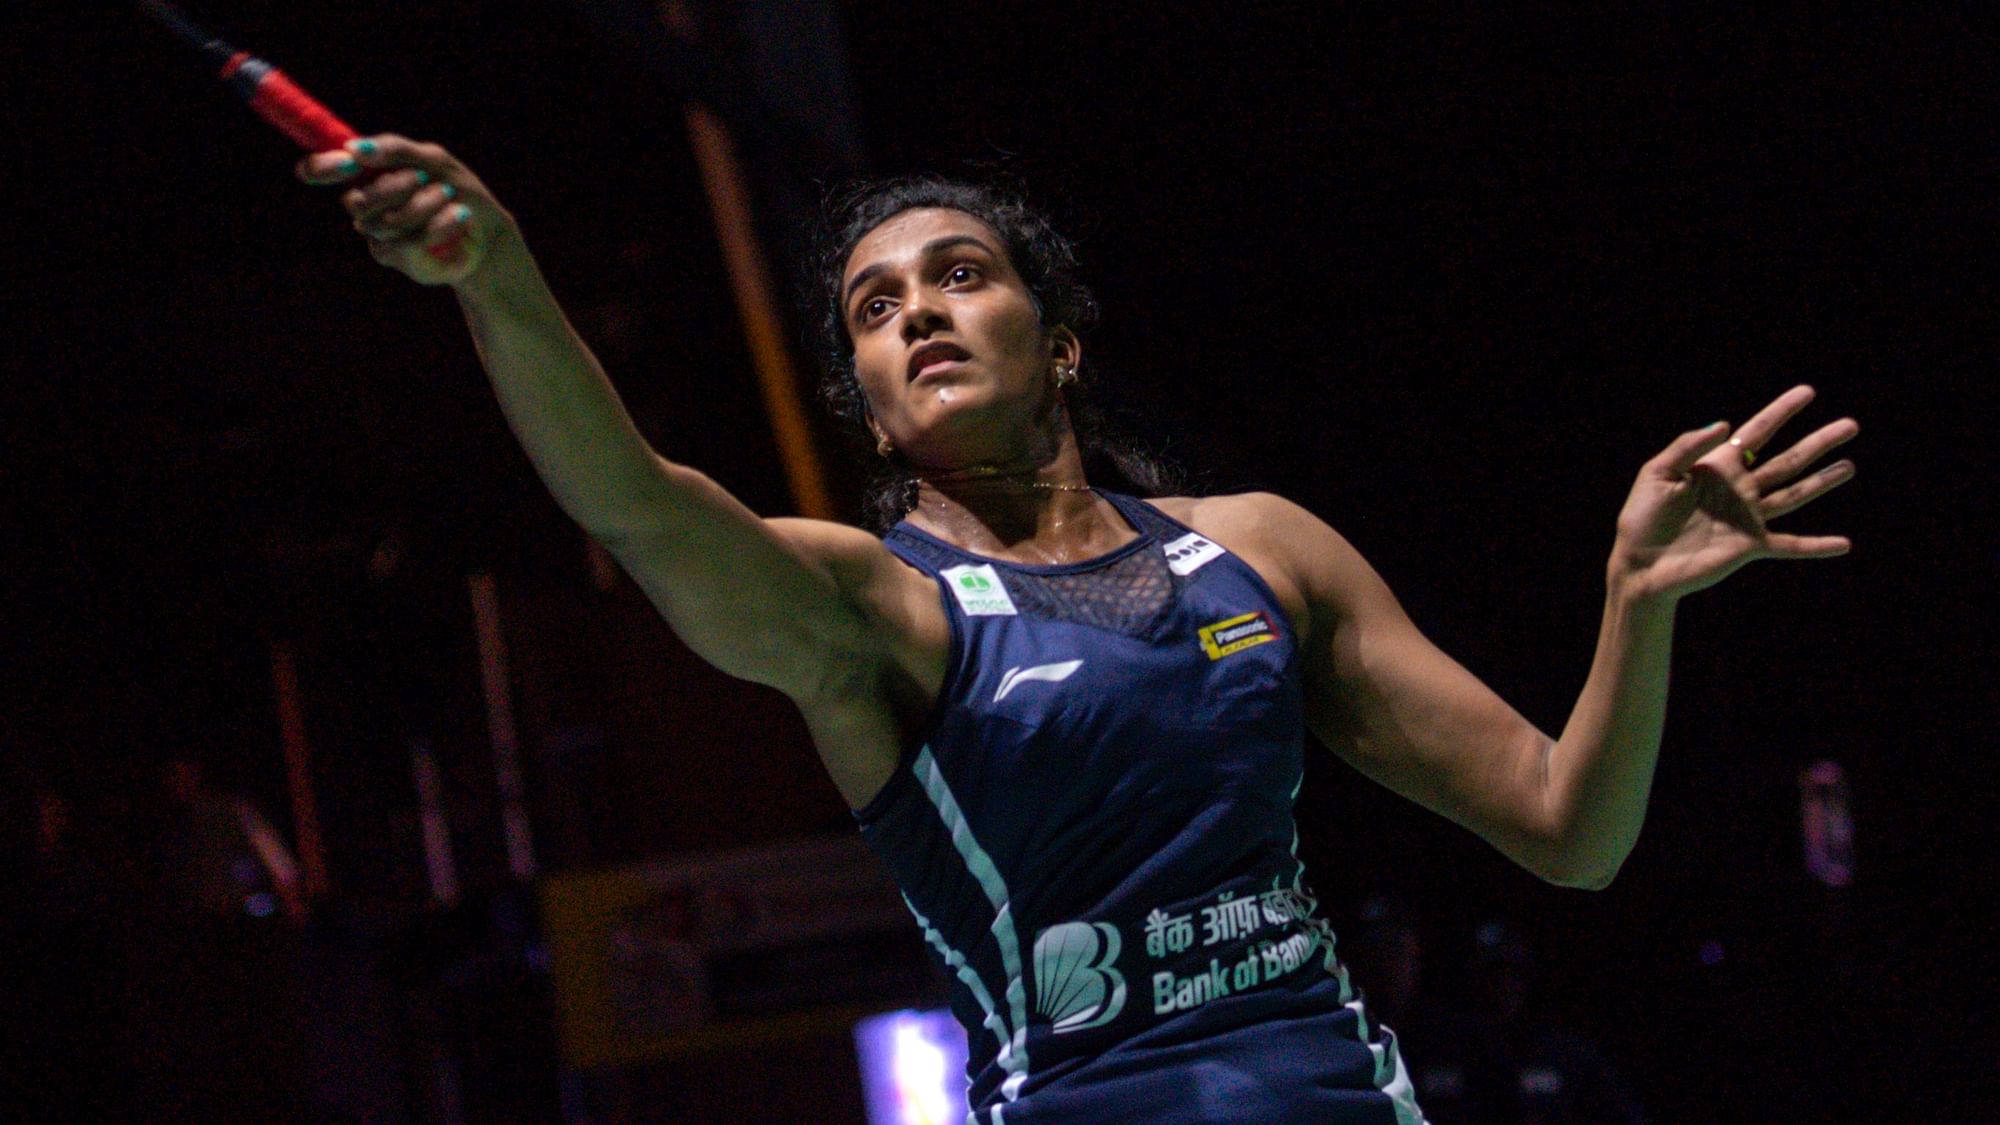 Indian shuttler PV Sindhu defeated Chen Yu Fei of China to storm into the finals of the BWF World Championships.